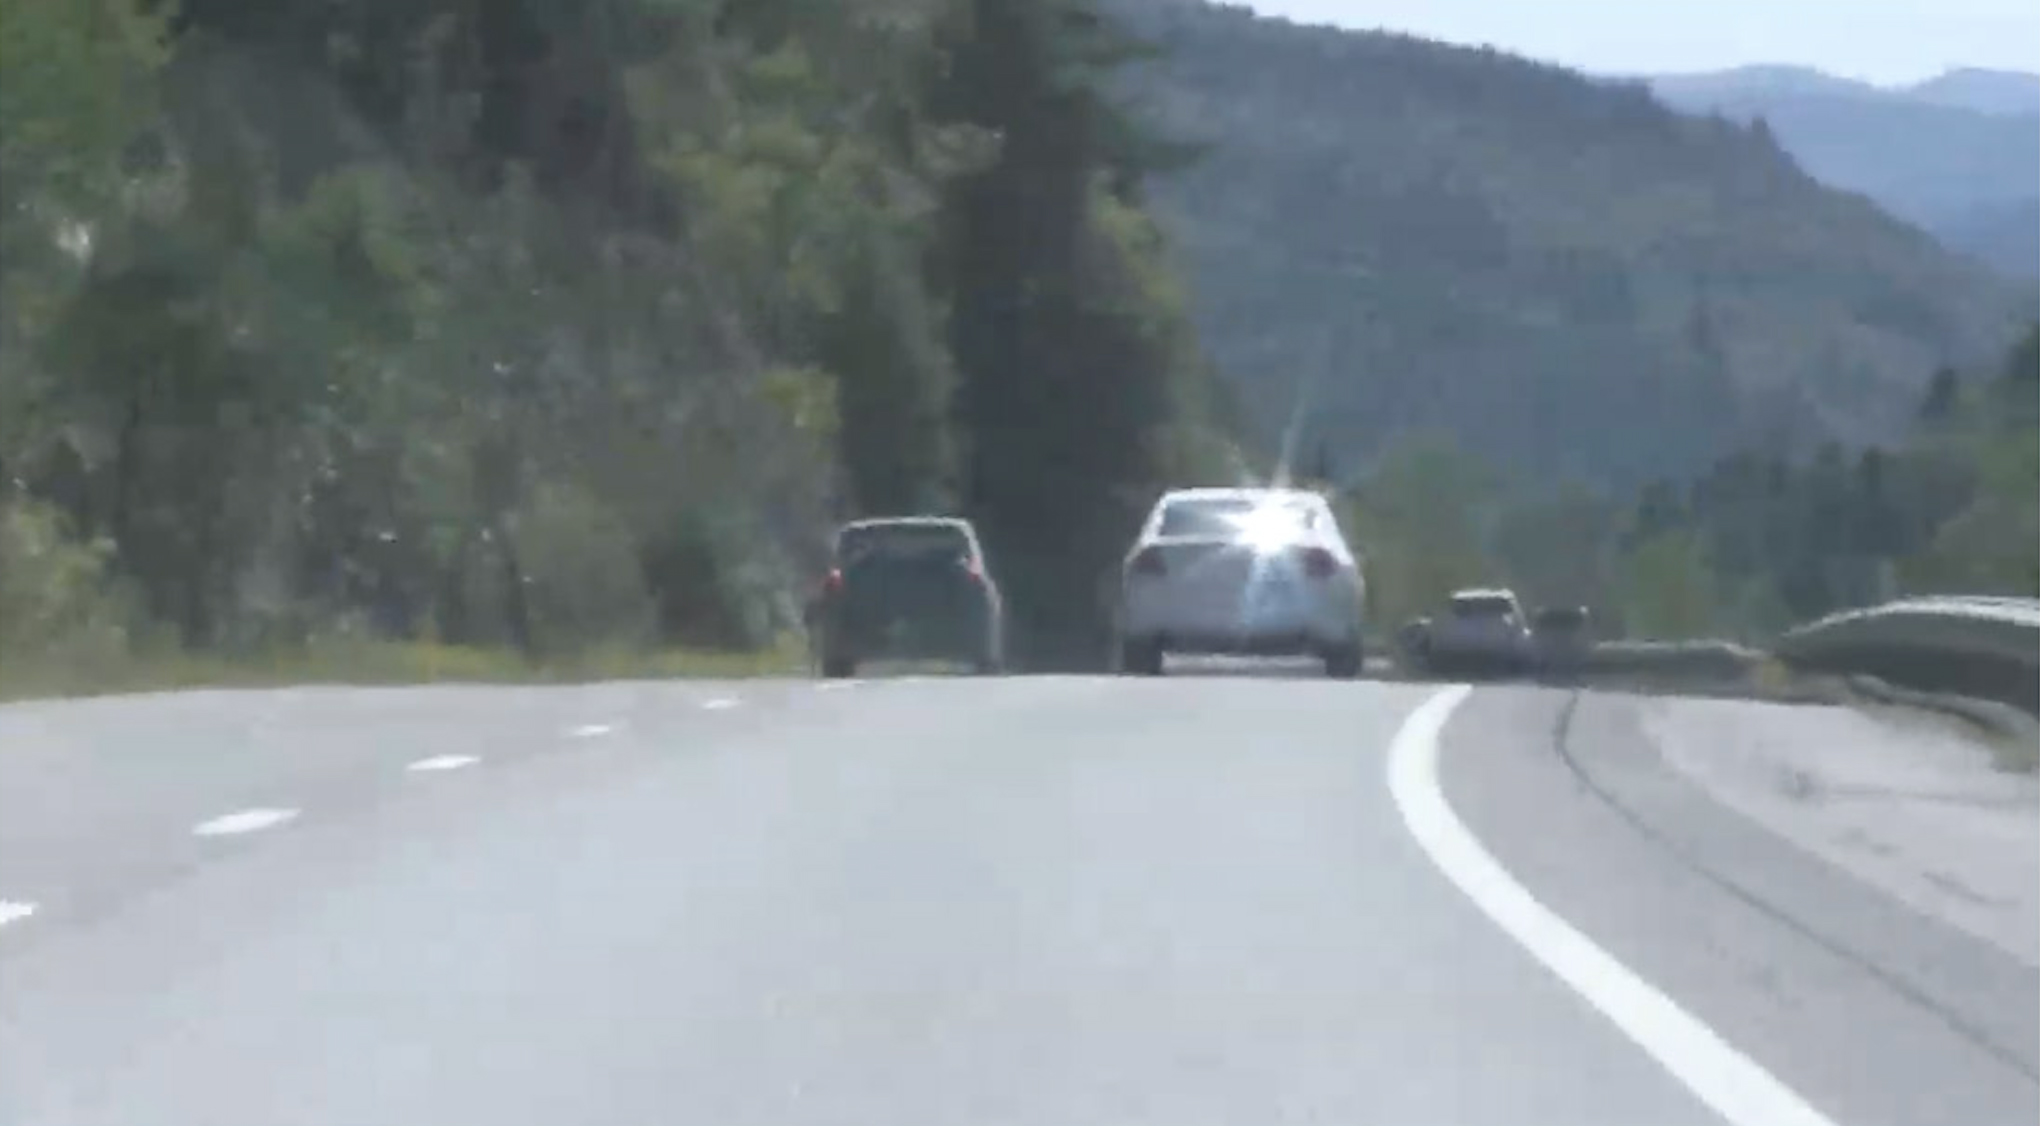 17_driving_speedlimit_with_the_help_of_sun_2013_video